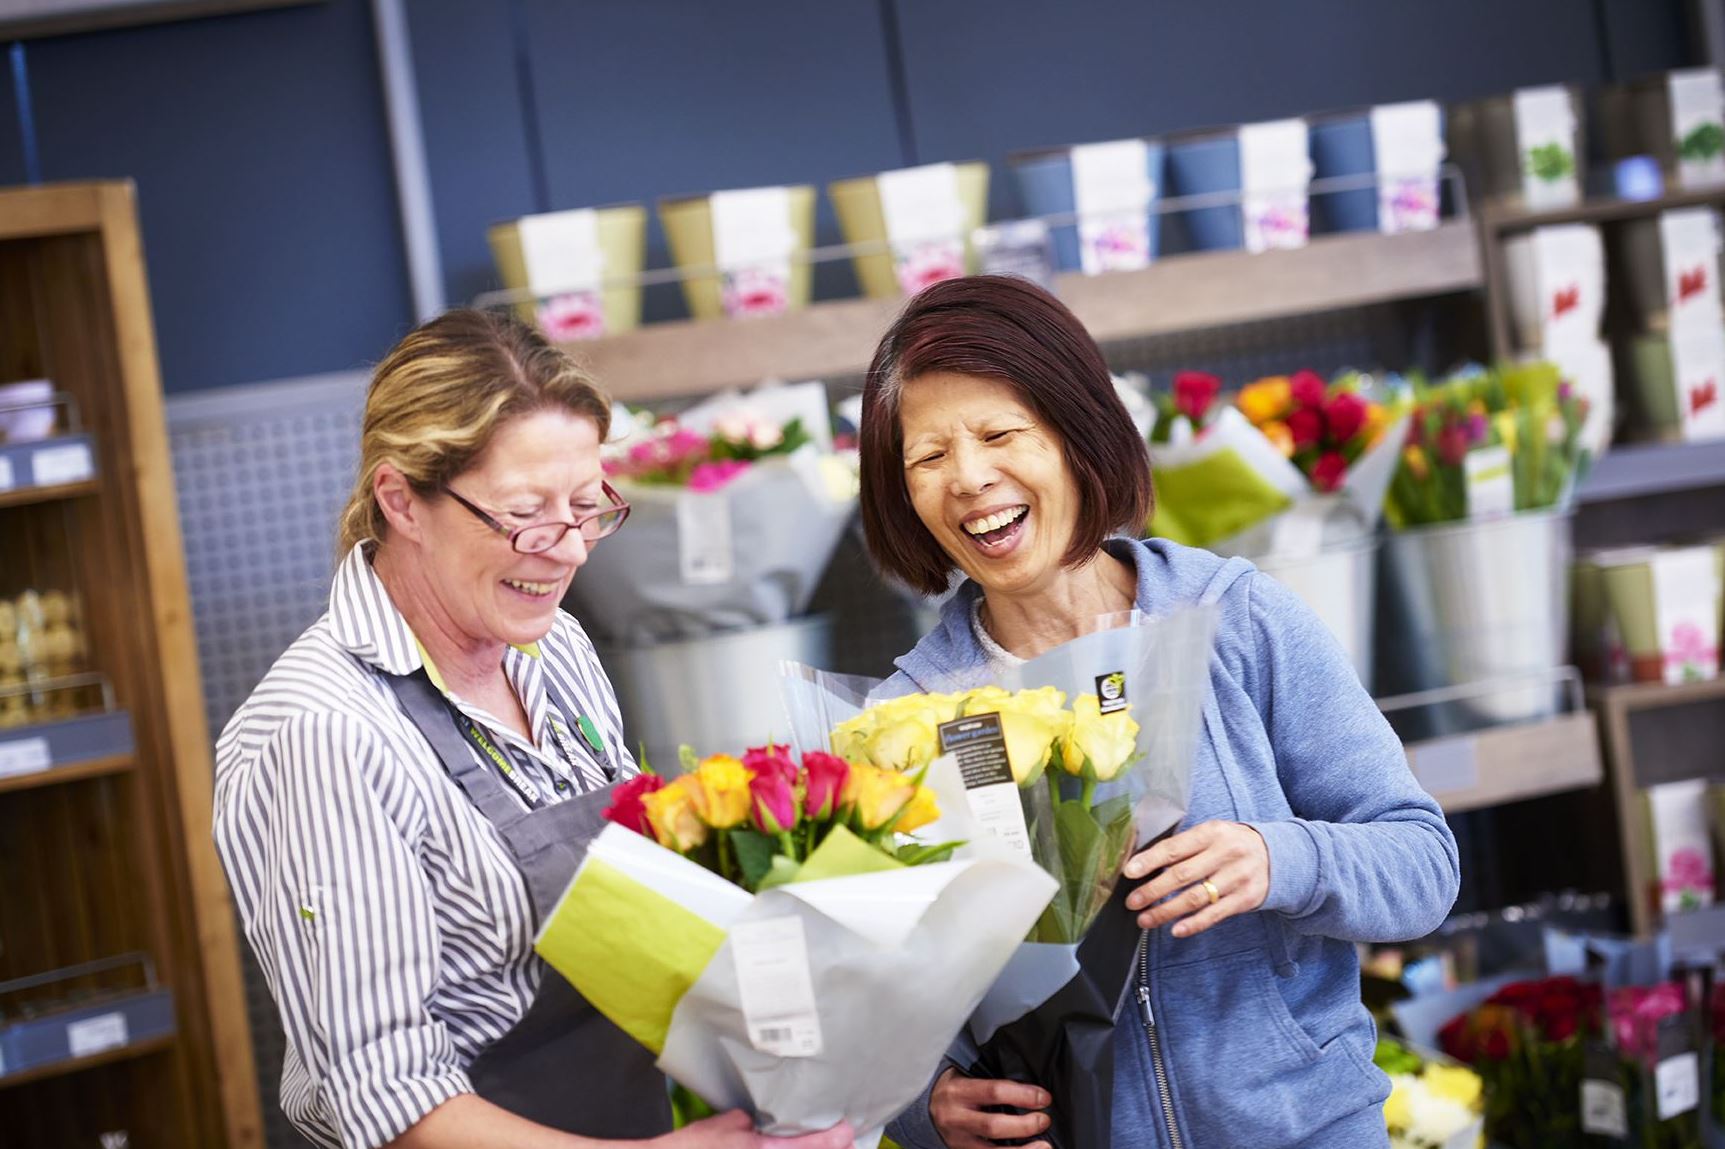 Sales Assistant laughs with a customer as they look at a bouquet of bright flowers